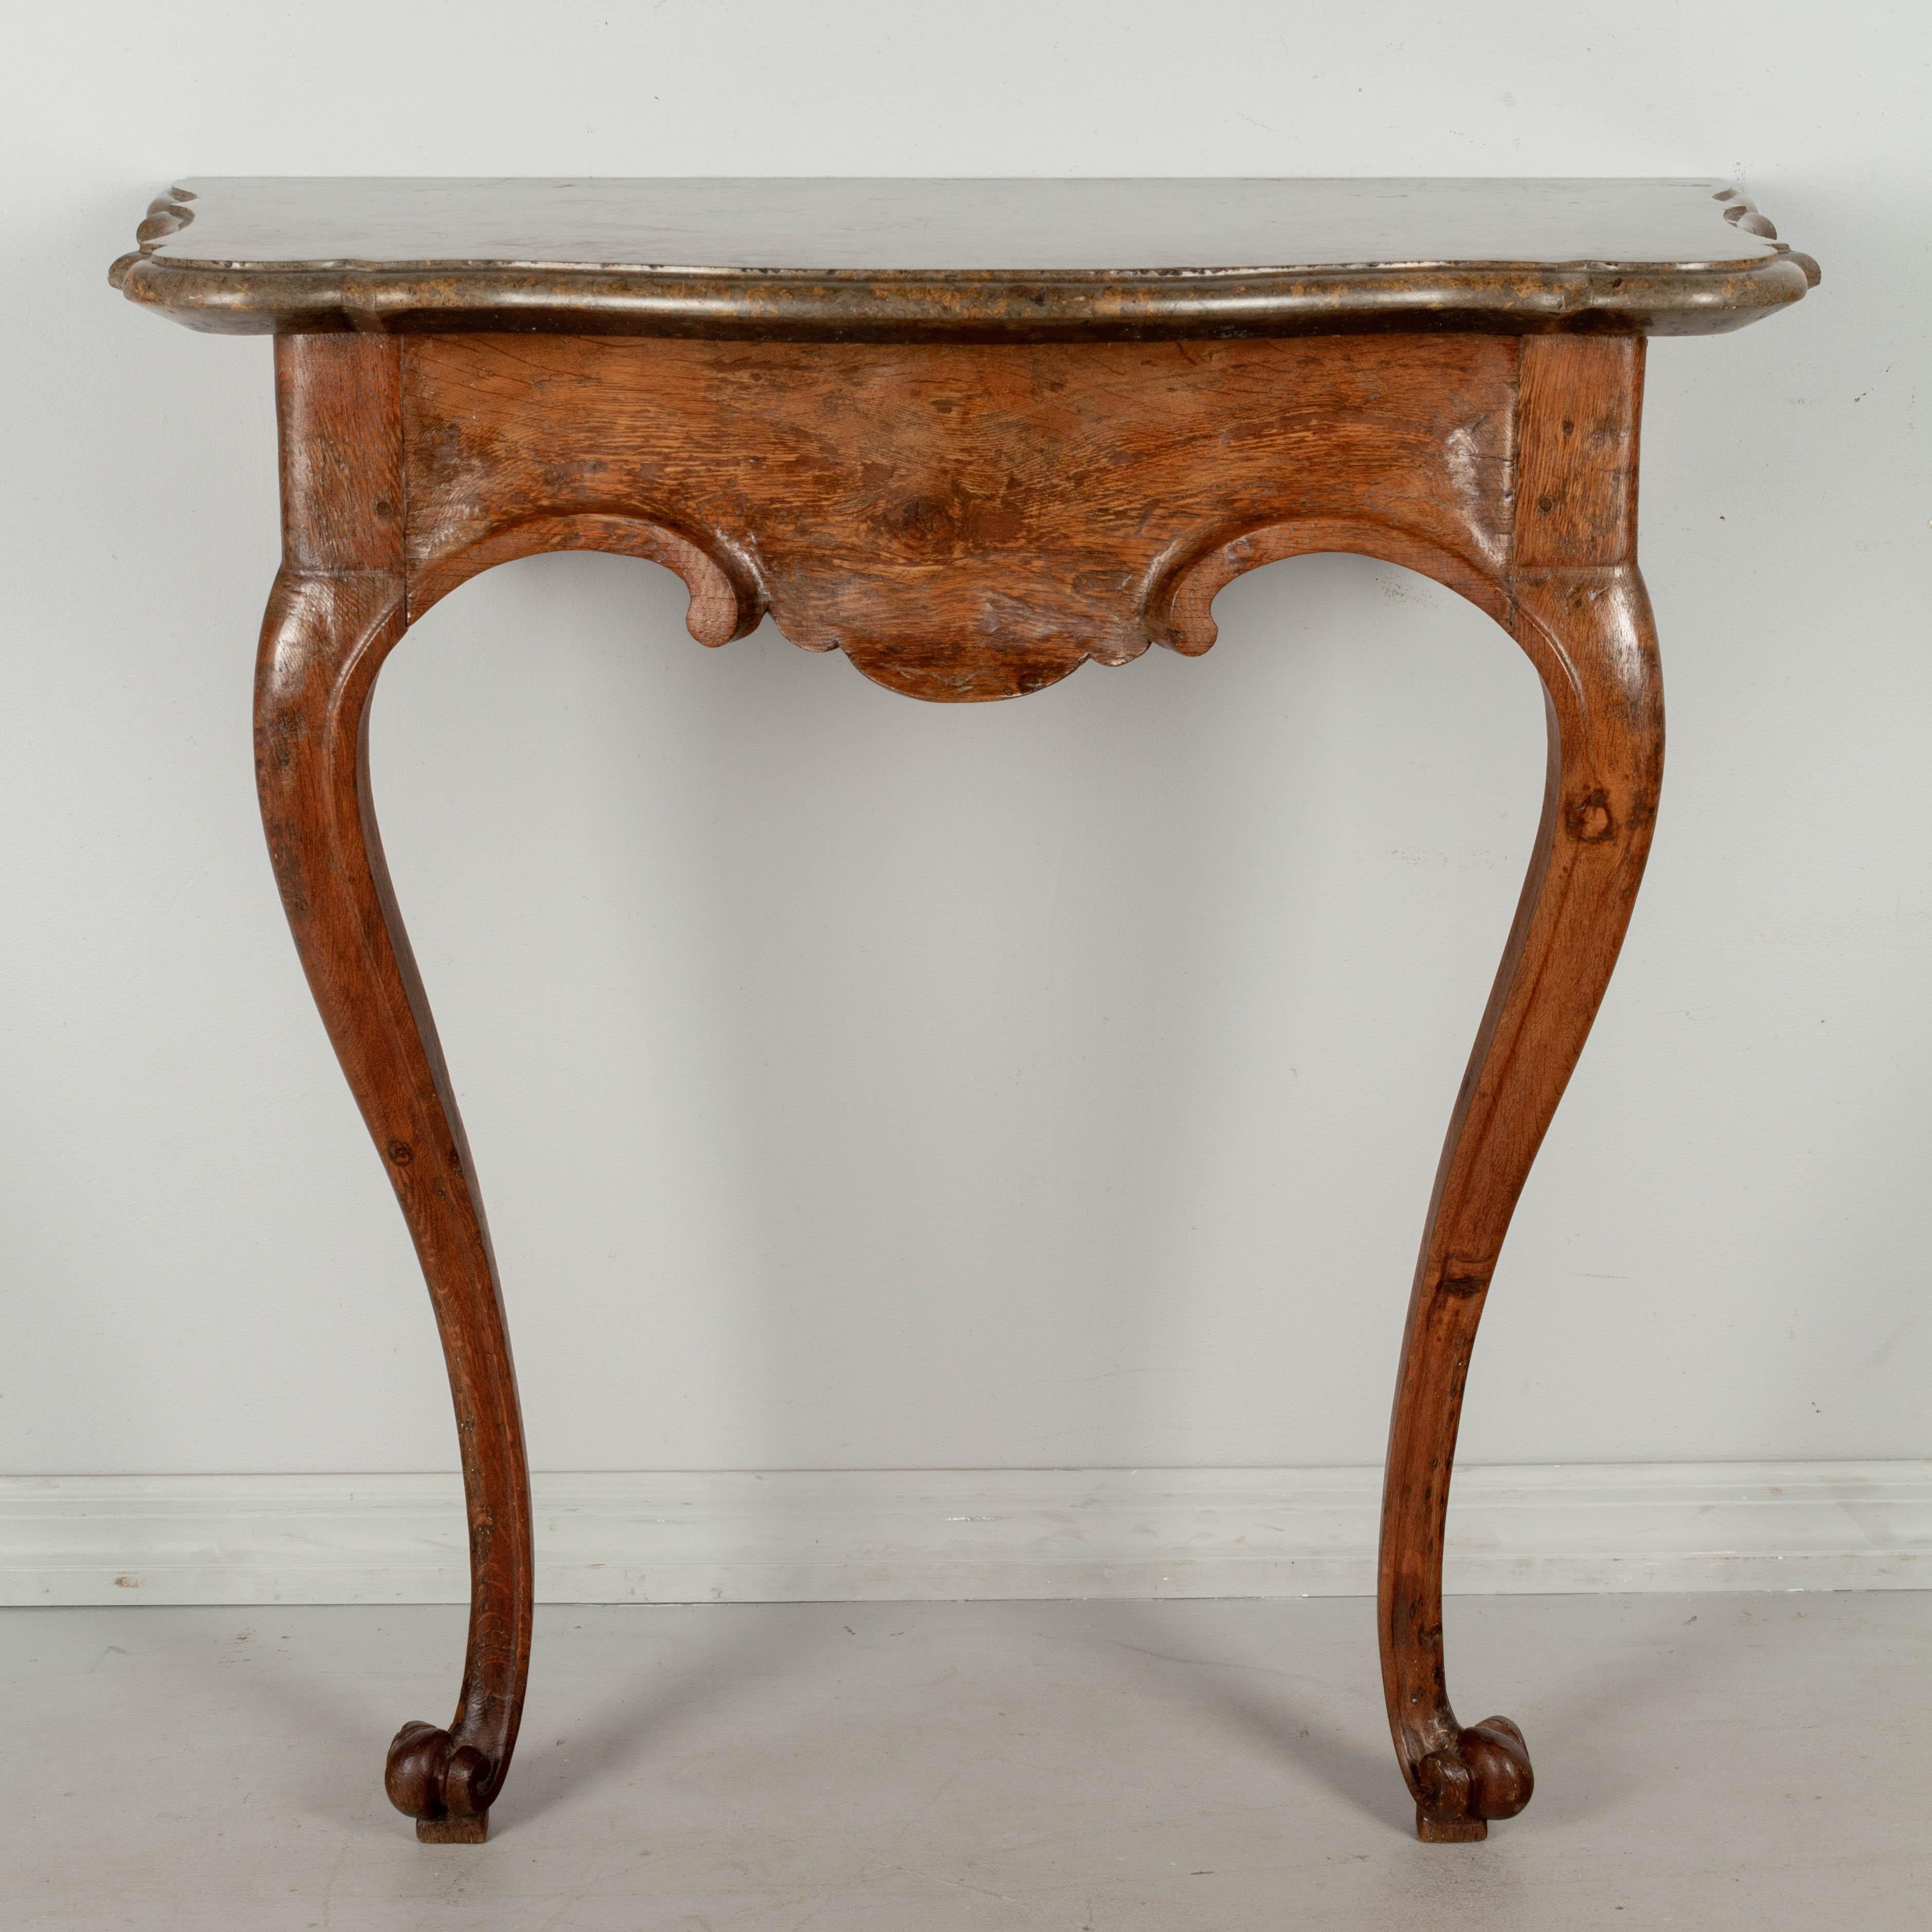 An 18th century Italian carved oak, marble-top console table. Sculptural base made from thick planks with hand-carved scrolls and cabriole legs ending in paw feet. Original marble top has a beautiful grayish taupe color with warm copper vein. This